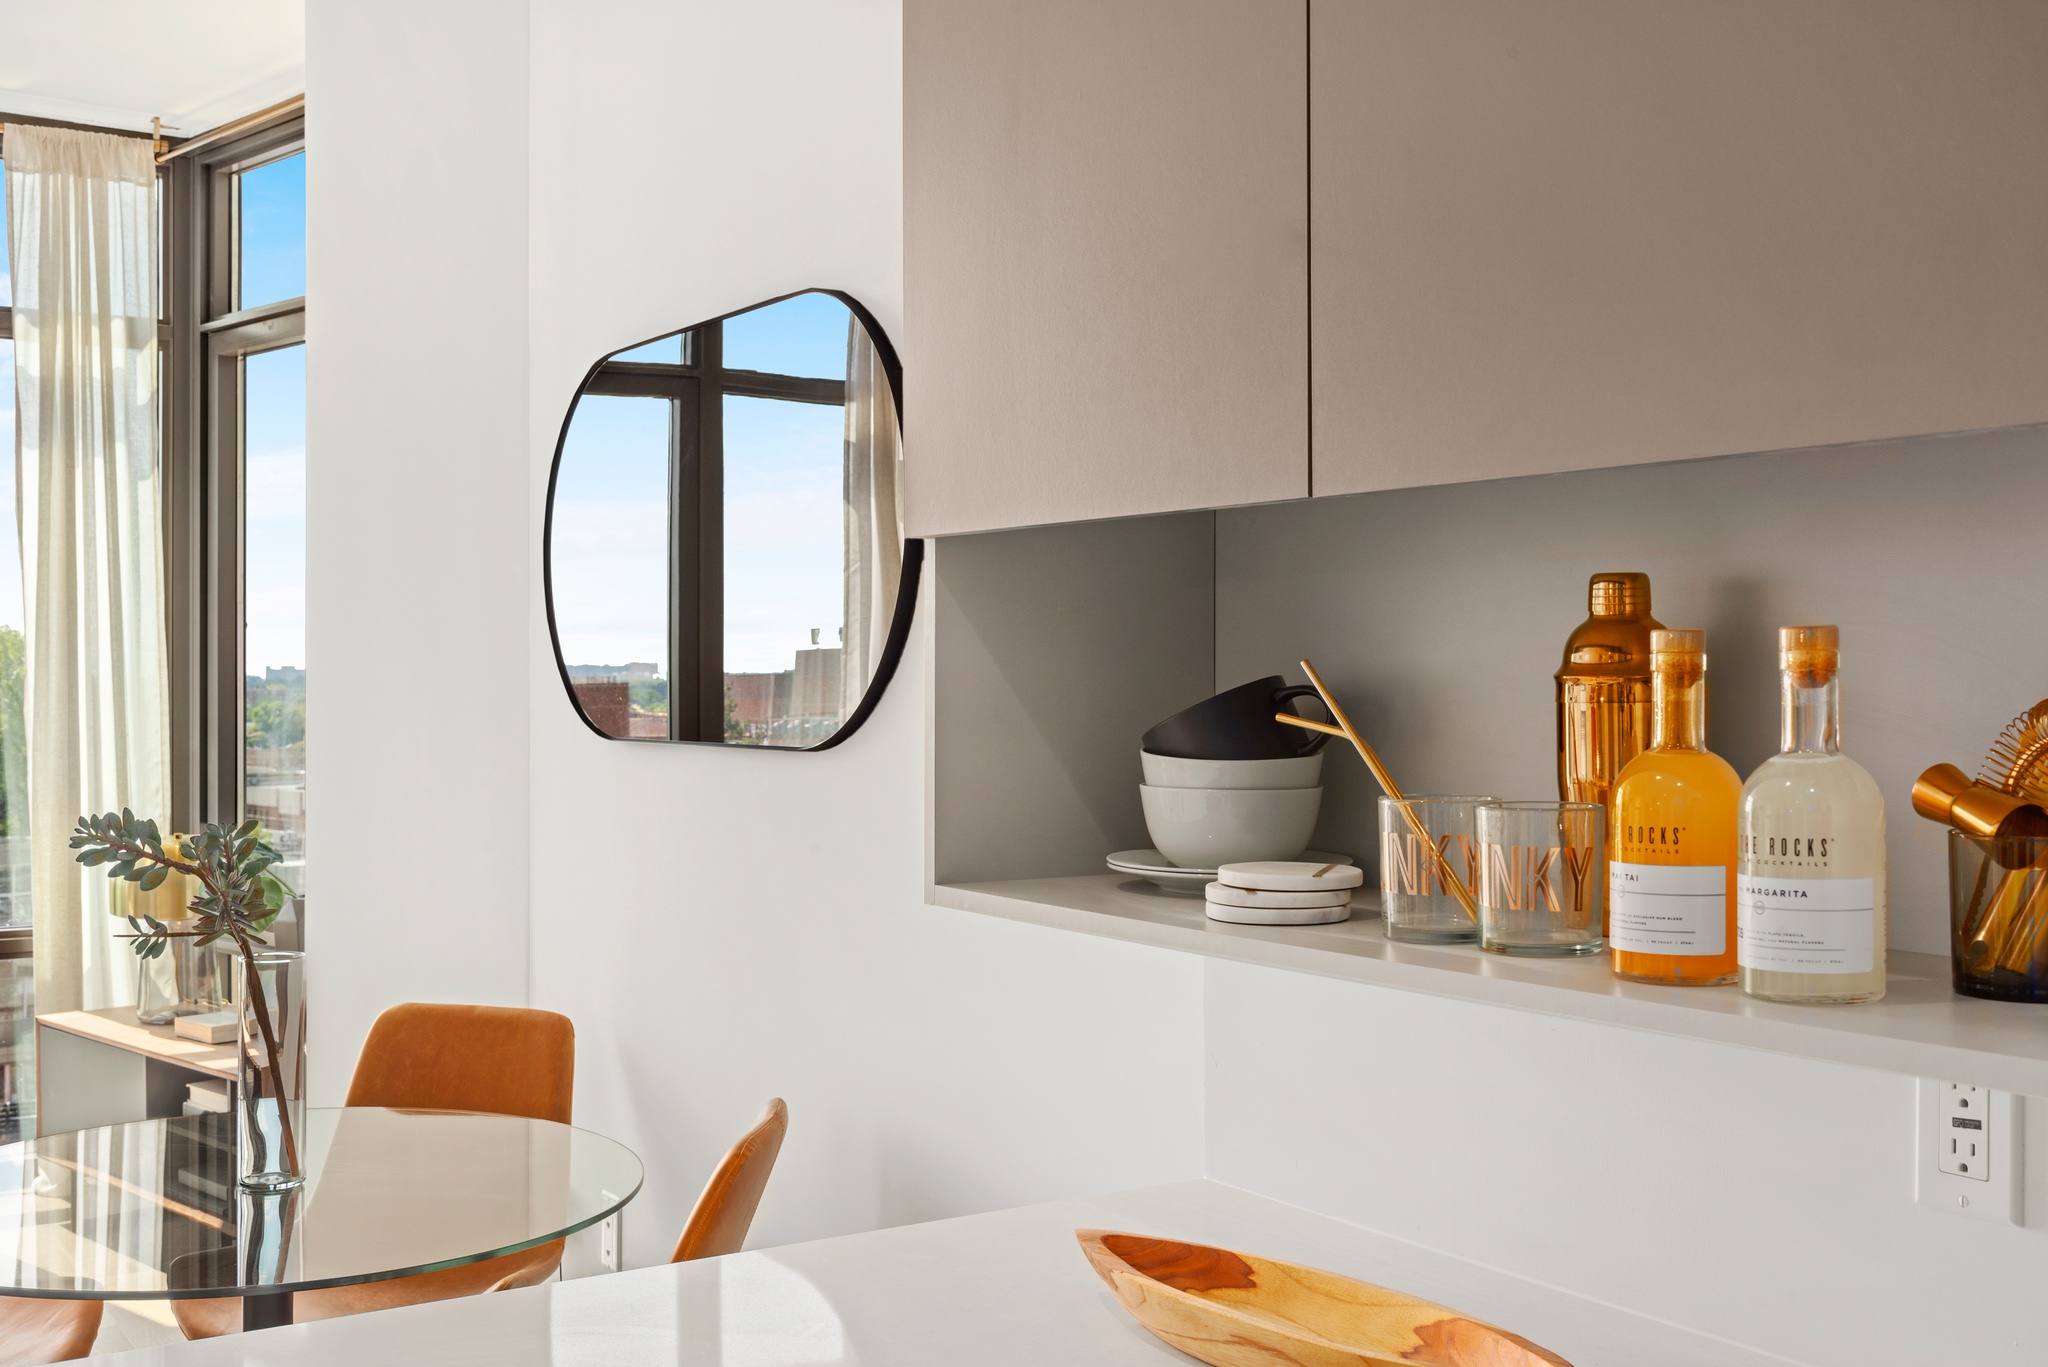 Kitchen detail showing built in shelf under tan cabinetry and glass table eat in seating with mirror above